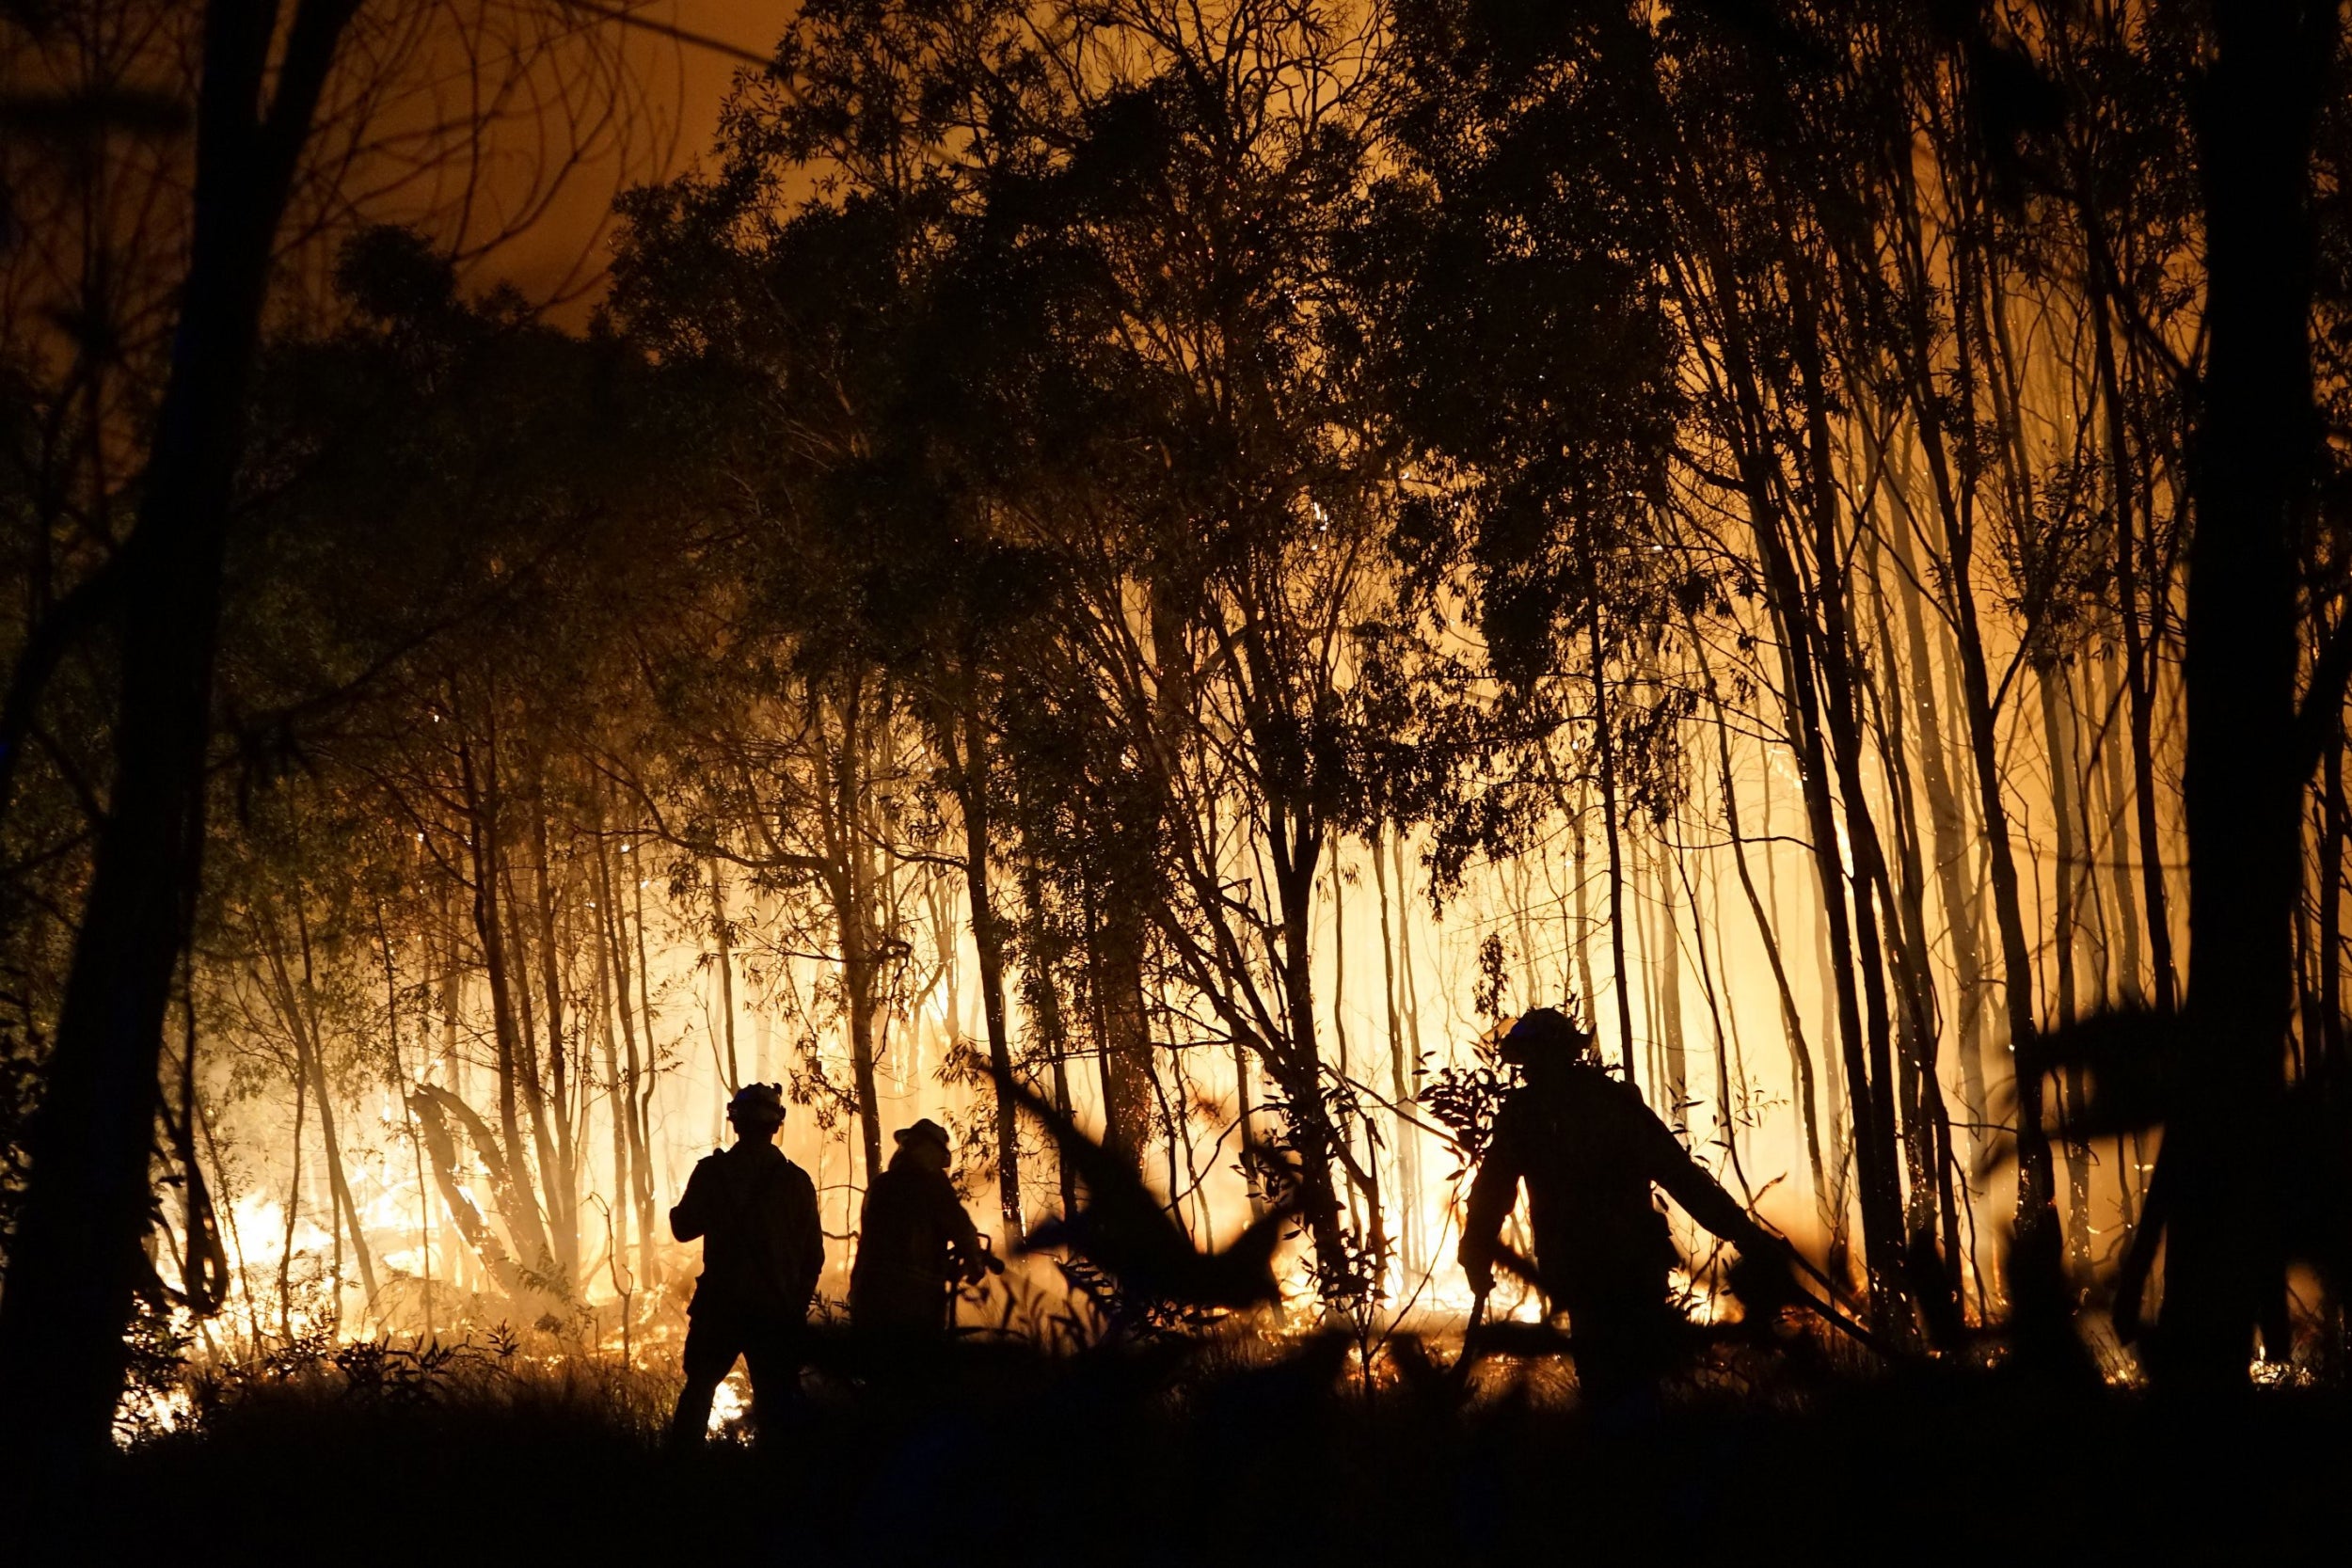 Bushfires in Australia, a country set to miss a key deadline for upping its climate ambitions